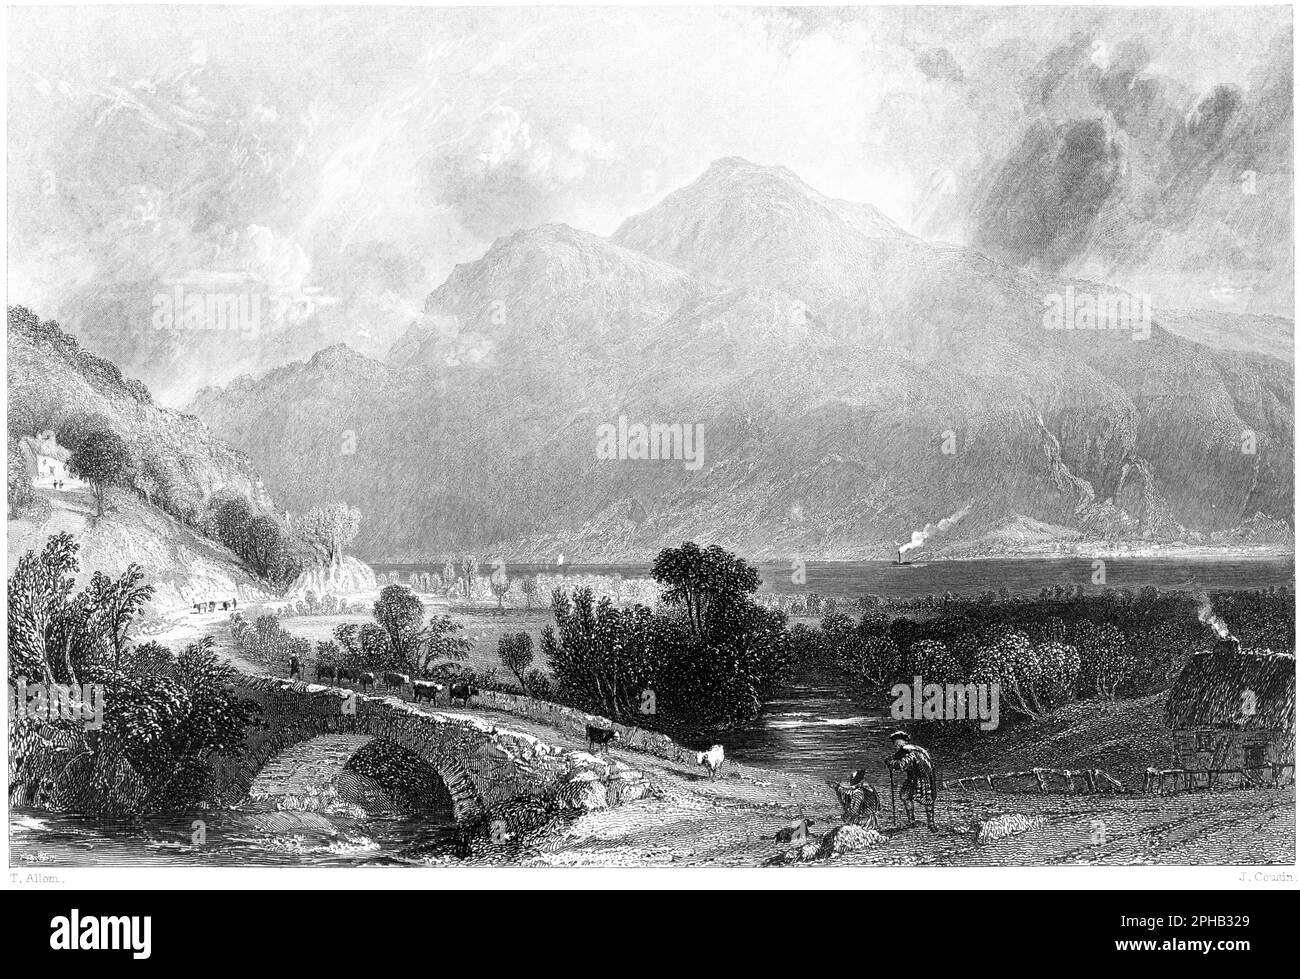 An engraving of Ben Lomond fron Inveruglas, Dunbartonshire, Scotland UK scanned at high resolution from a book printed in 1840. Stock Photo